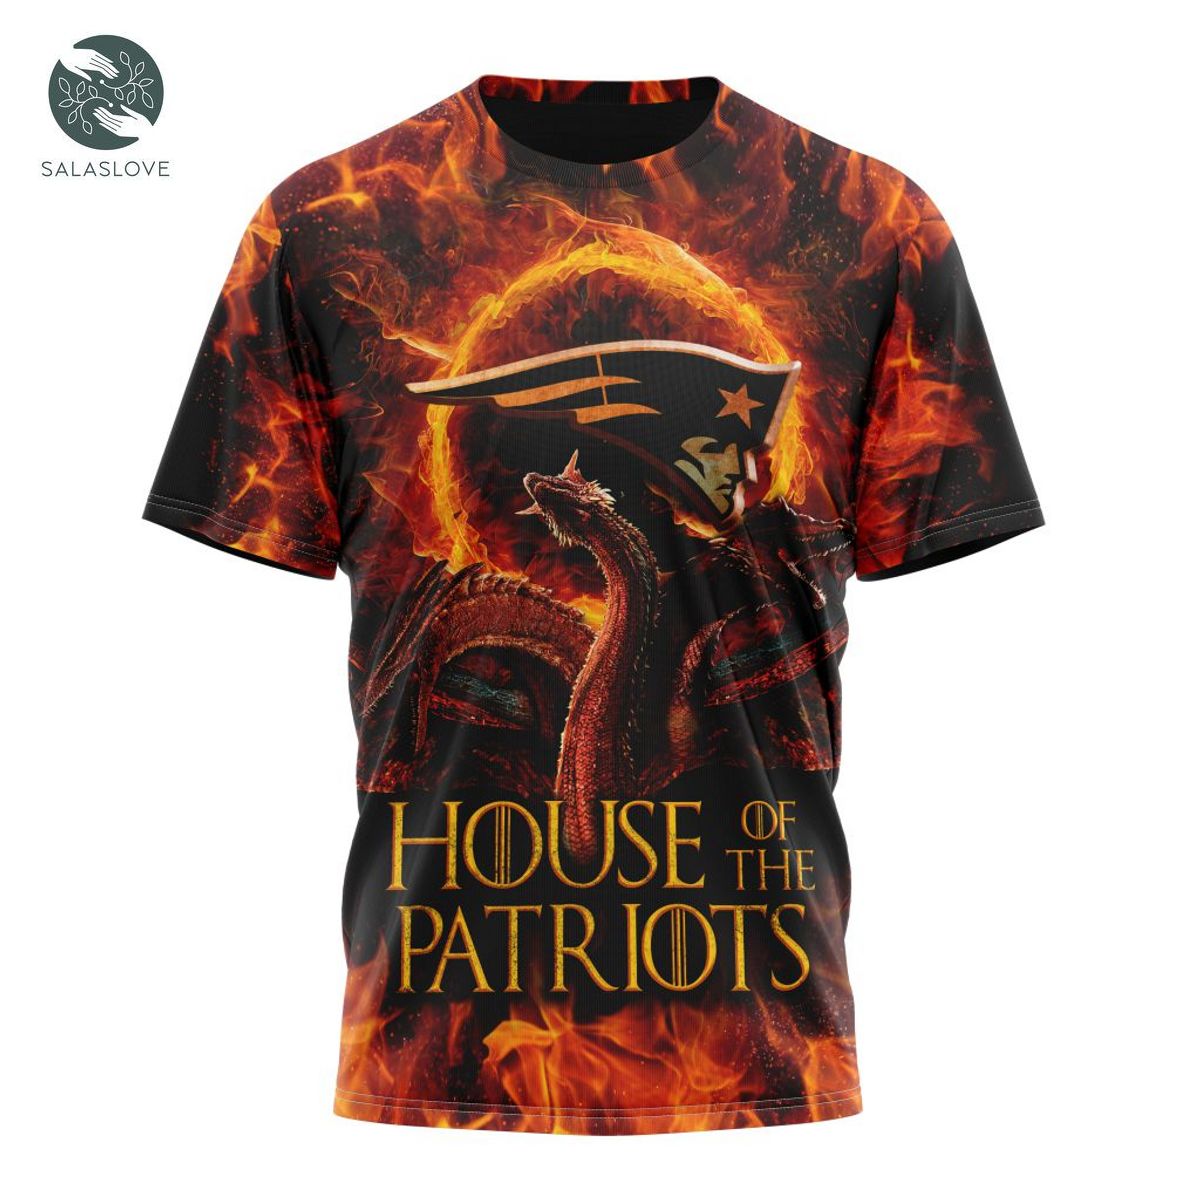 NFL New England Patriots GAME OF THRONES – HOUSE OF THE PATRIOTS Shirt